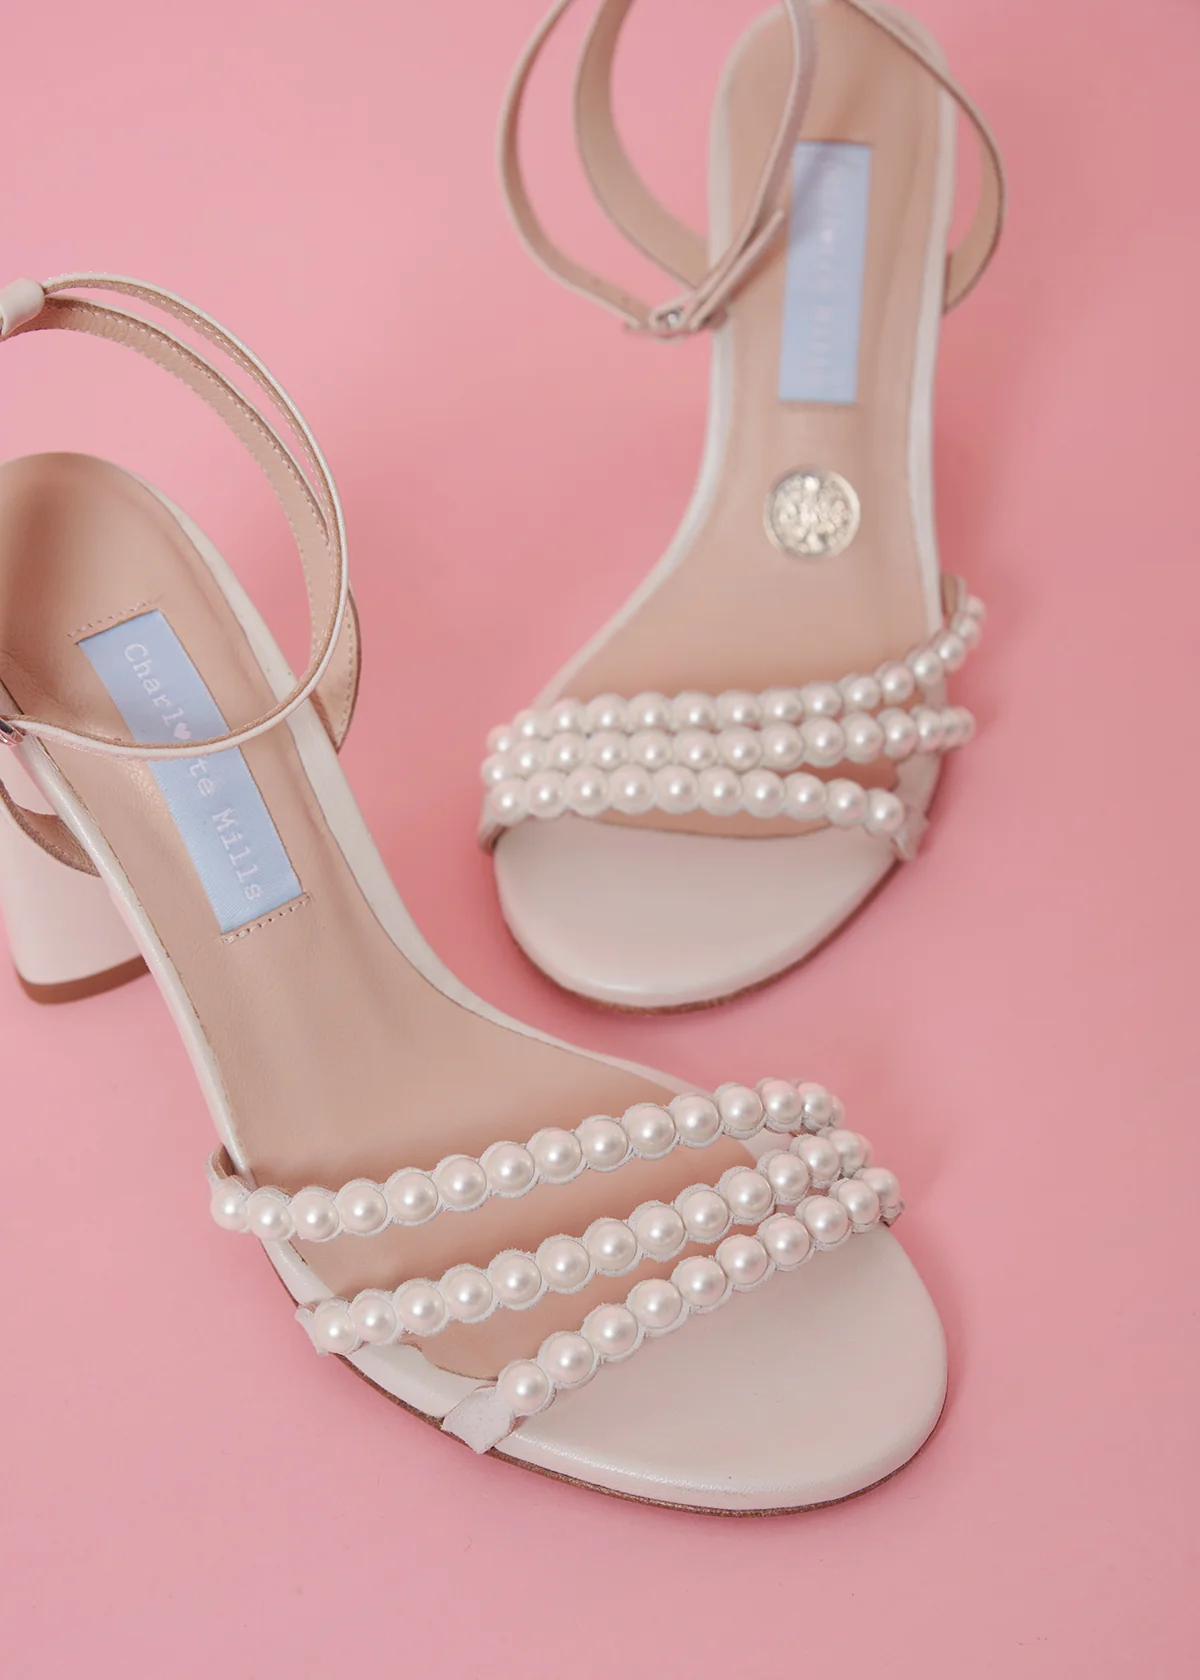 Charlotte Mills pearl strappy sandal wedding shoes